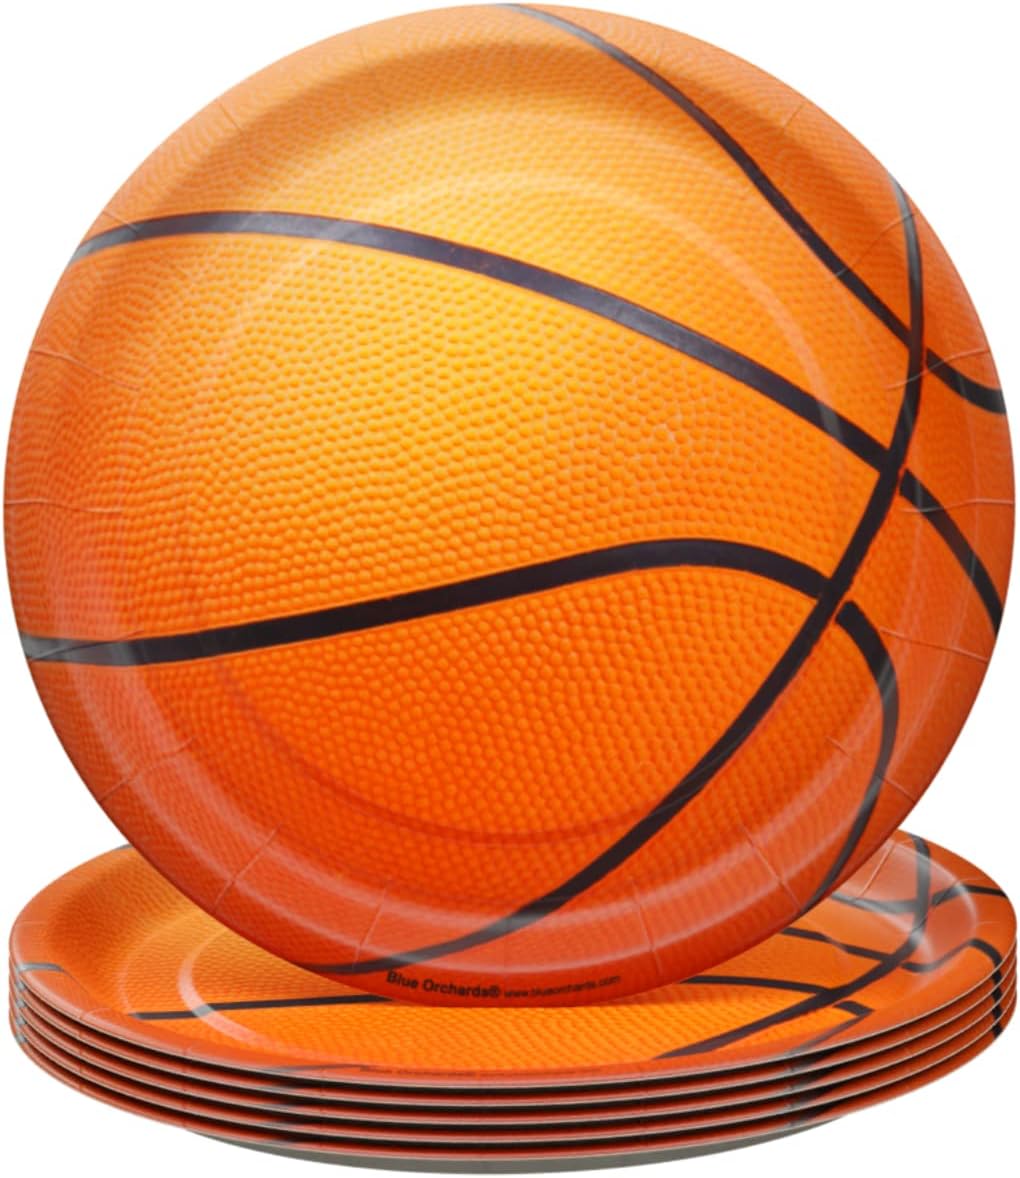 Basketball Party Supplies Packs (For 16 Guests)